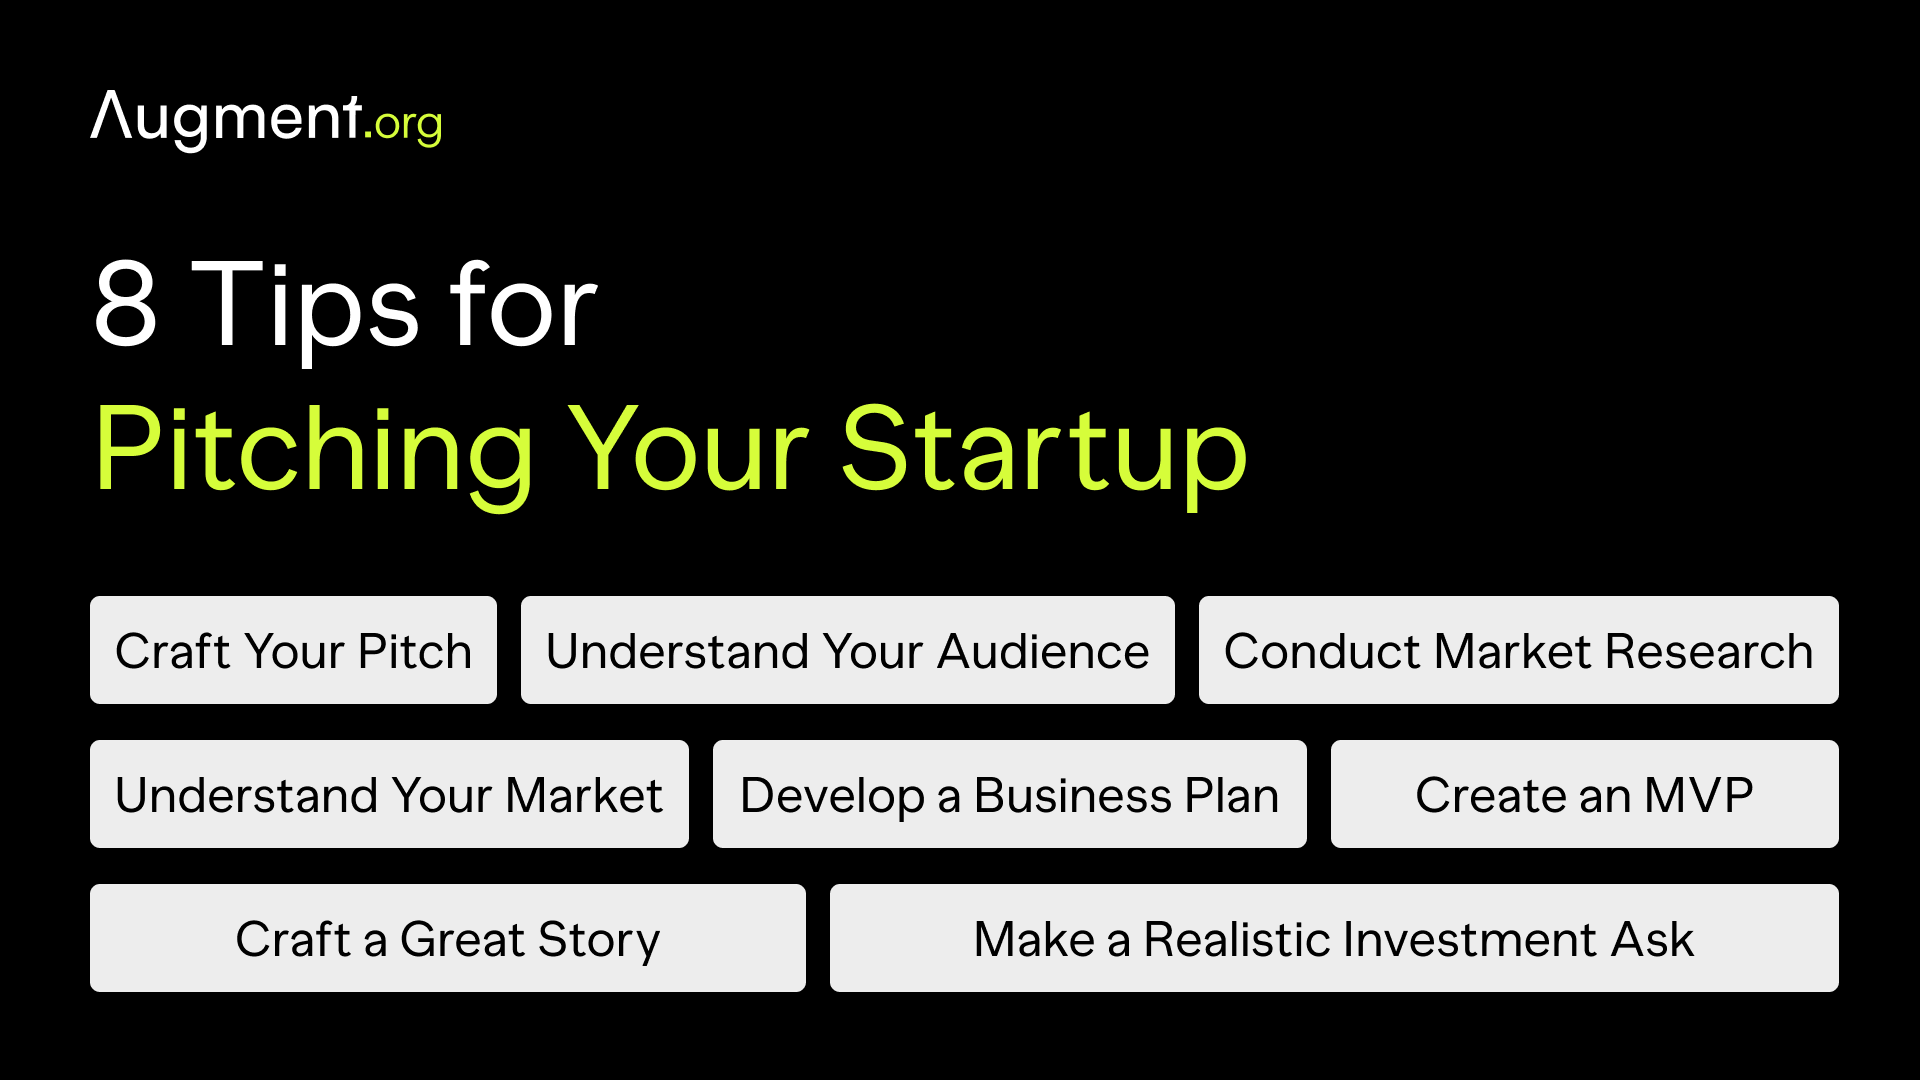 How to Pitch to Investors: 8 Tips for Pitching Your Startup